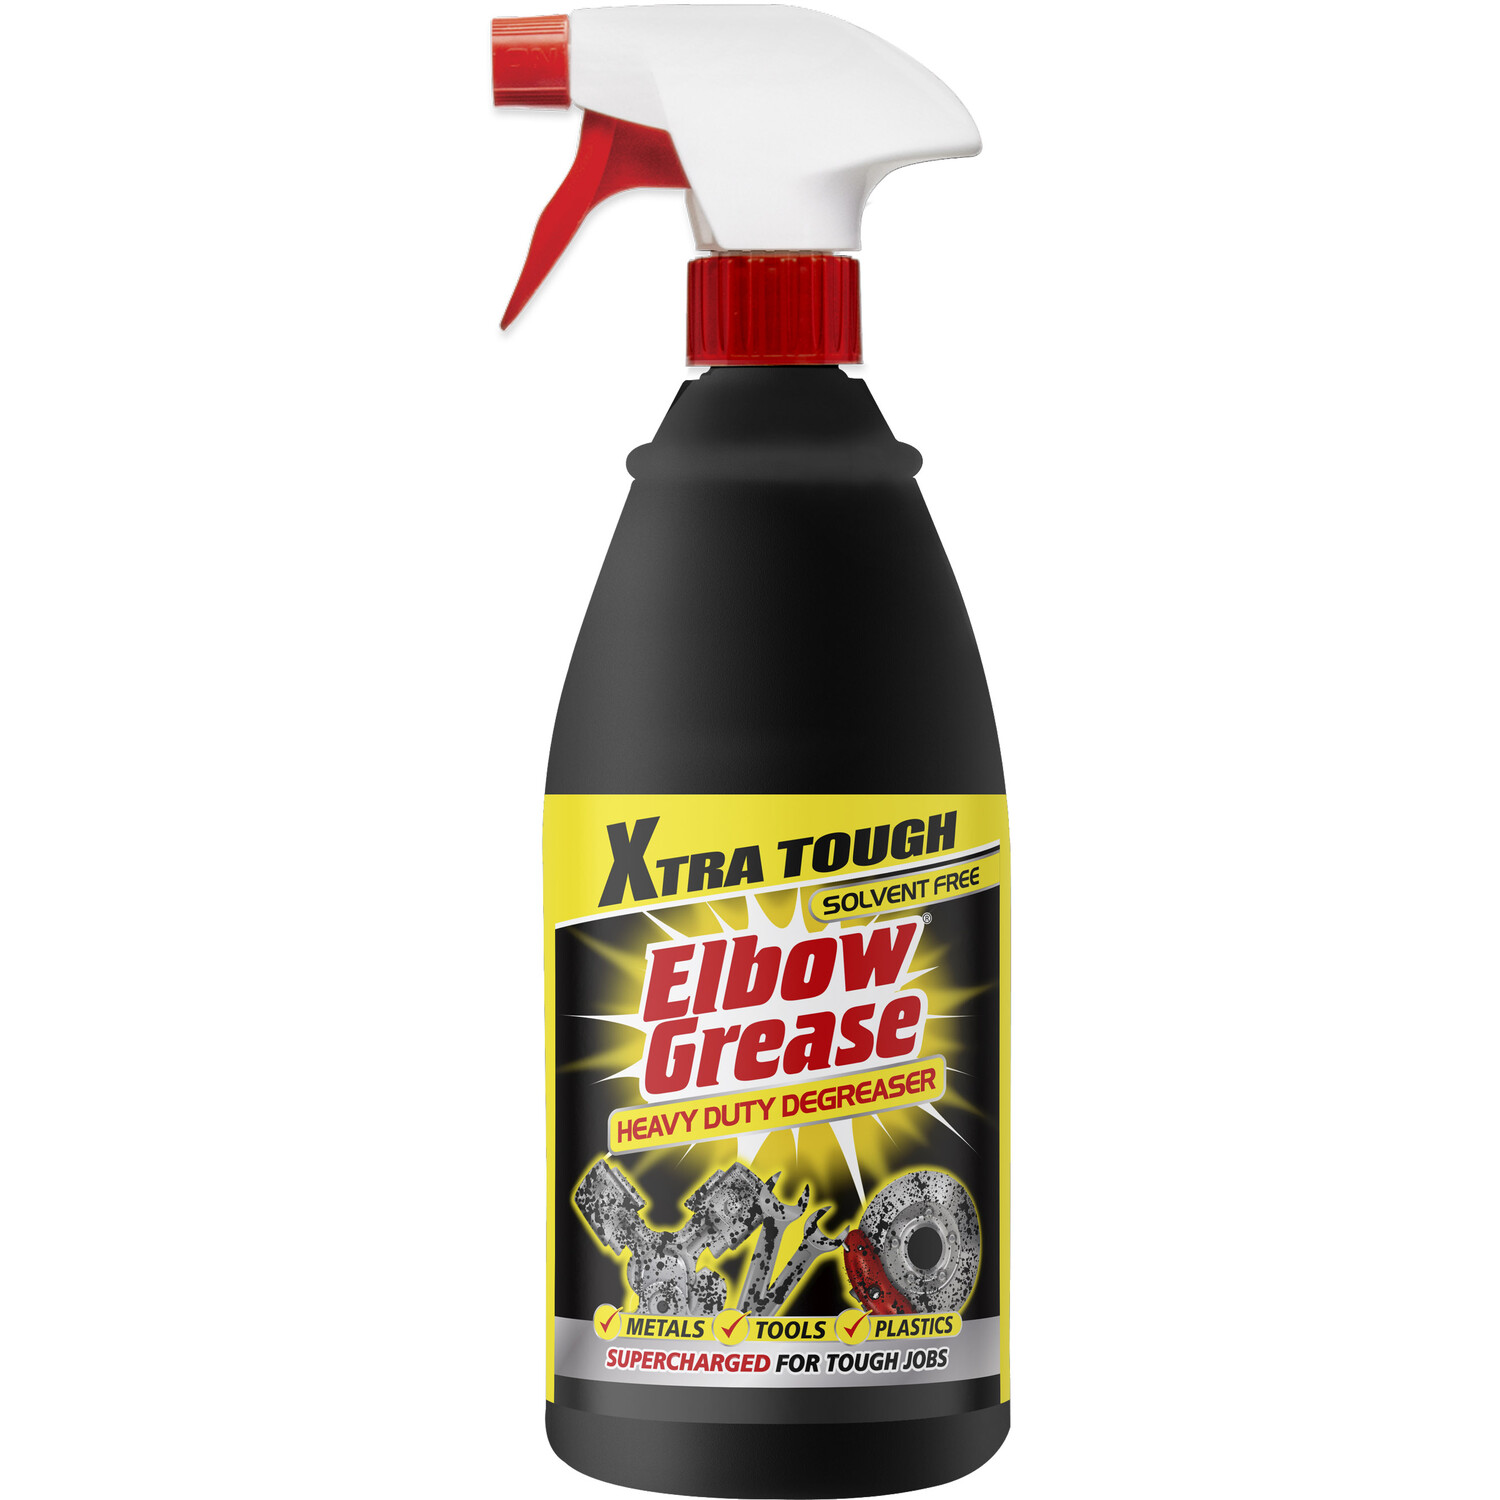 Elbow Grease Heavy Duty Degreaser Image